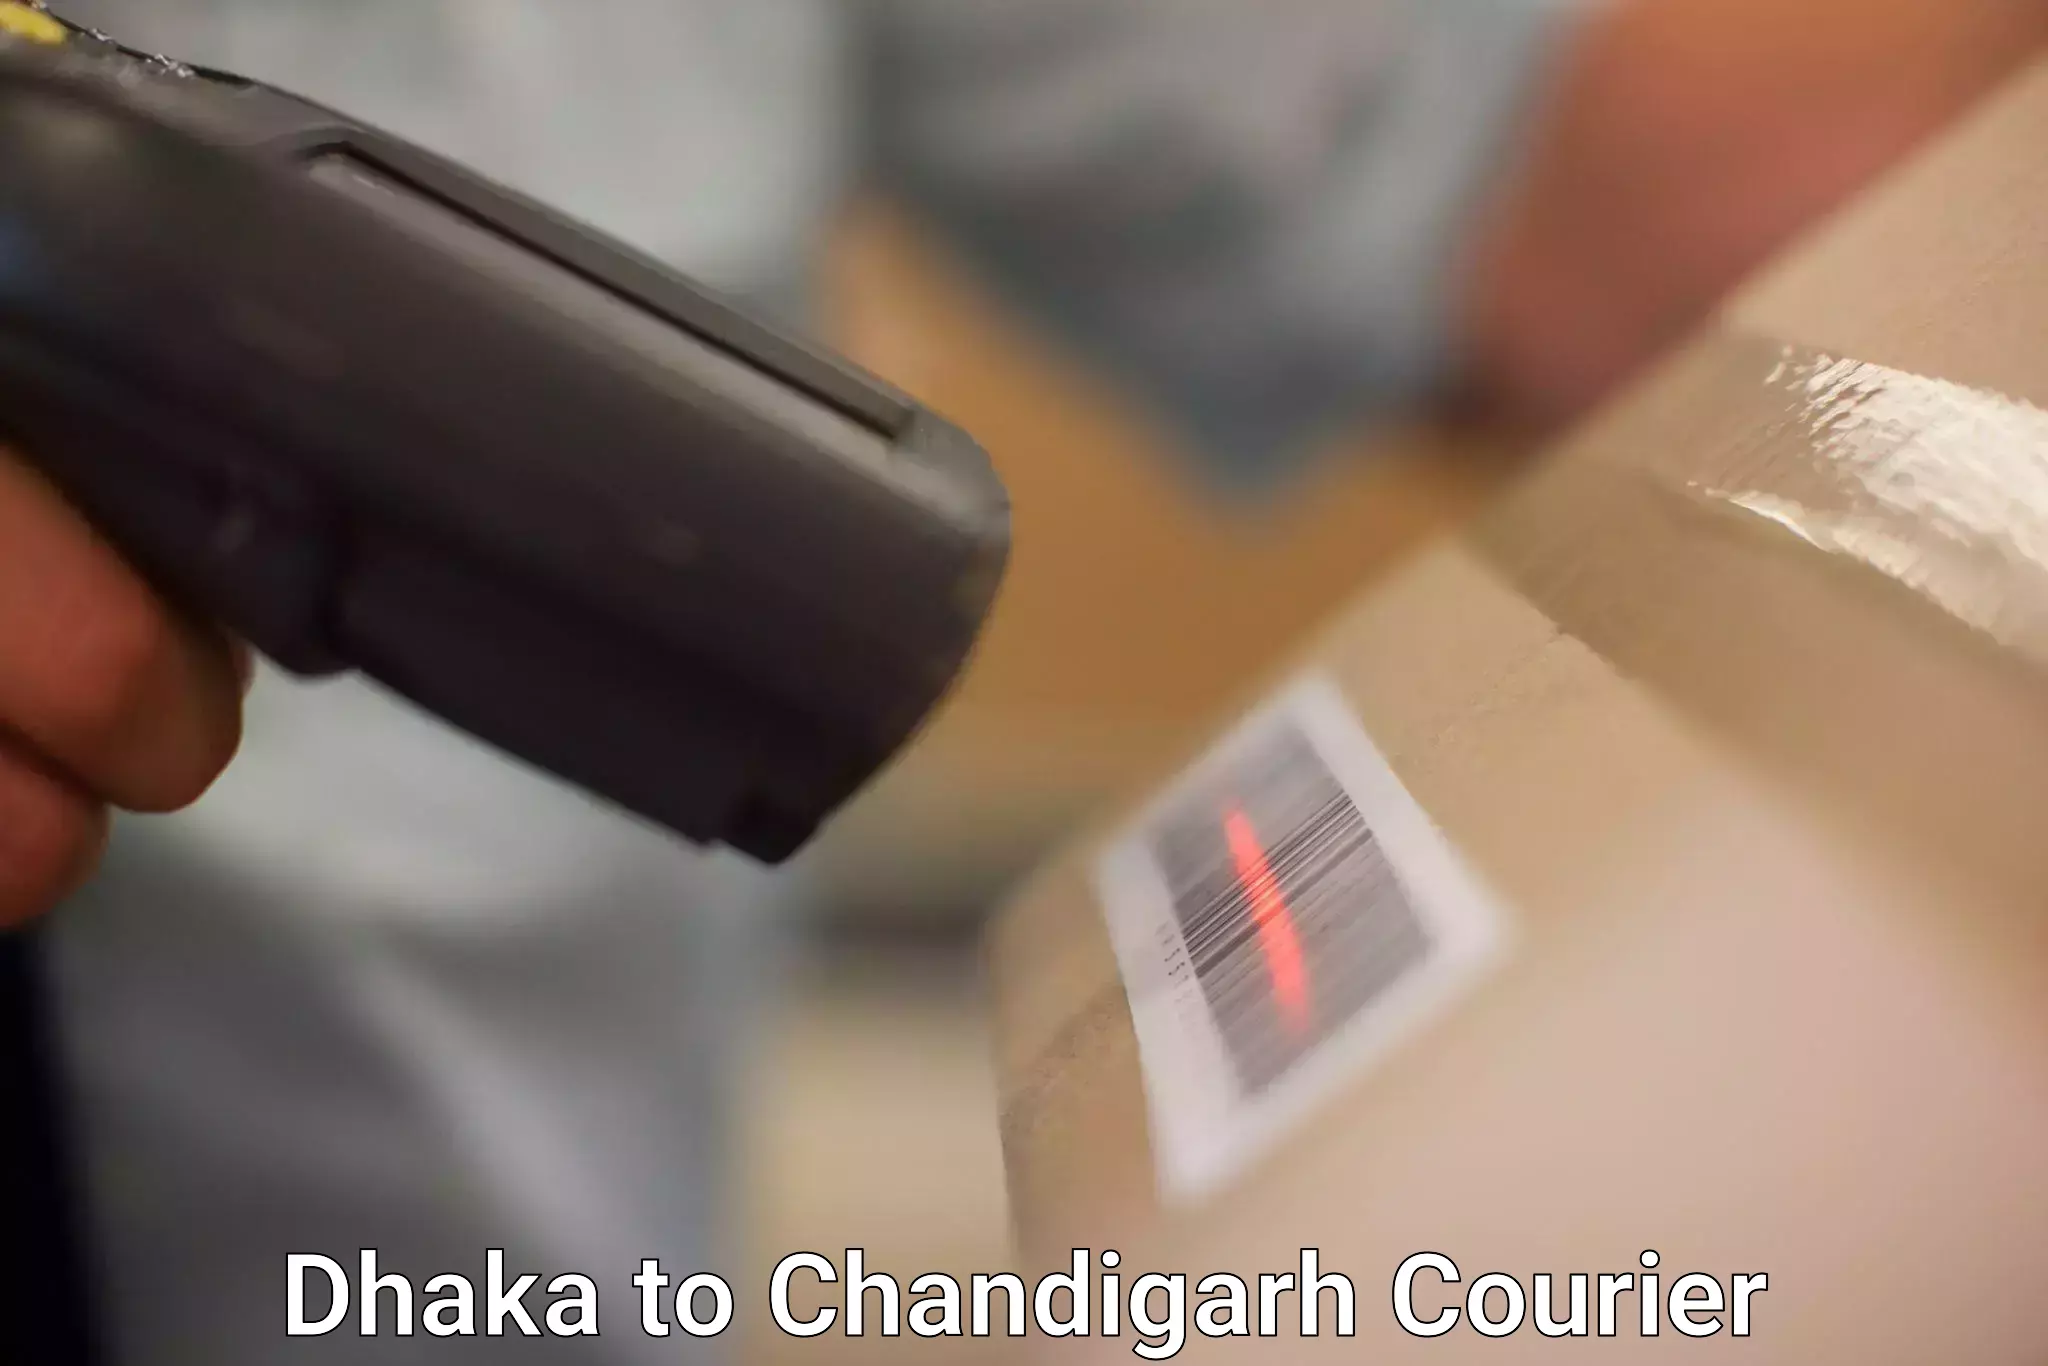 Courier service comparison Dhaka to Chandigarh